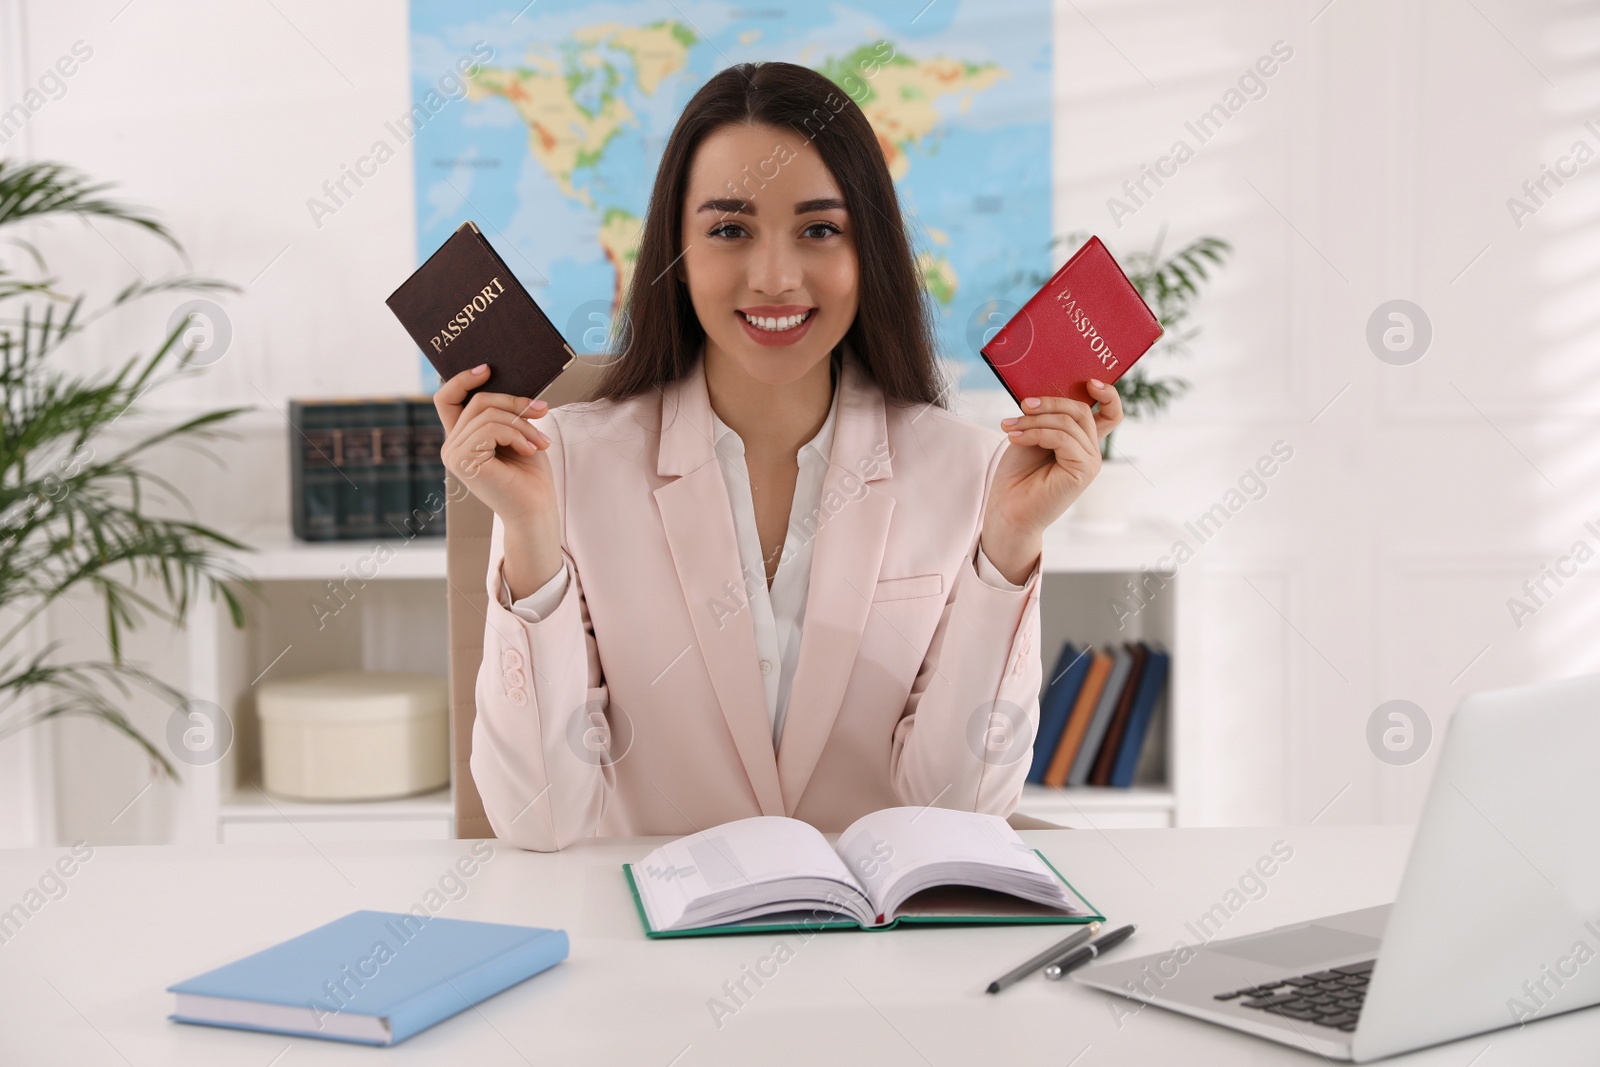 Photo of Happy manager holding passports at desk in travel agency